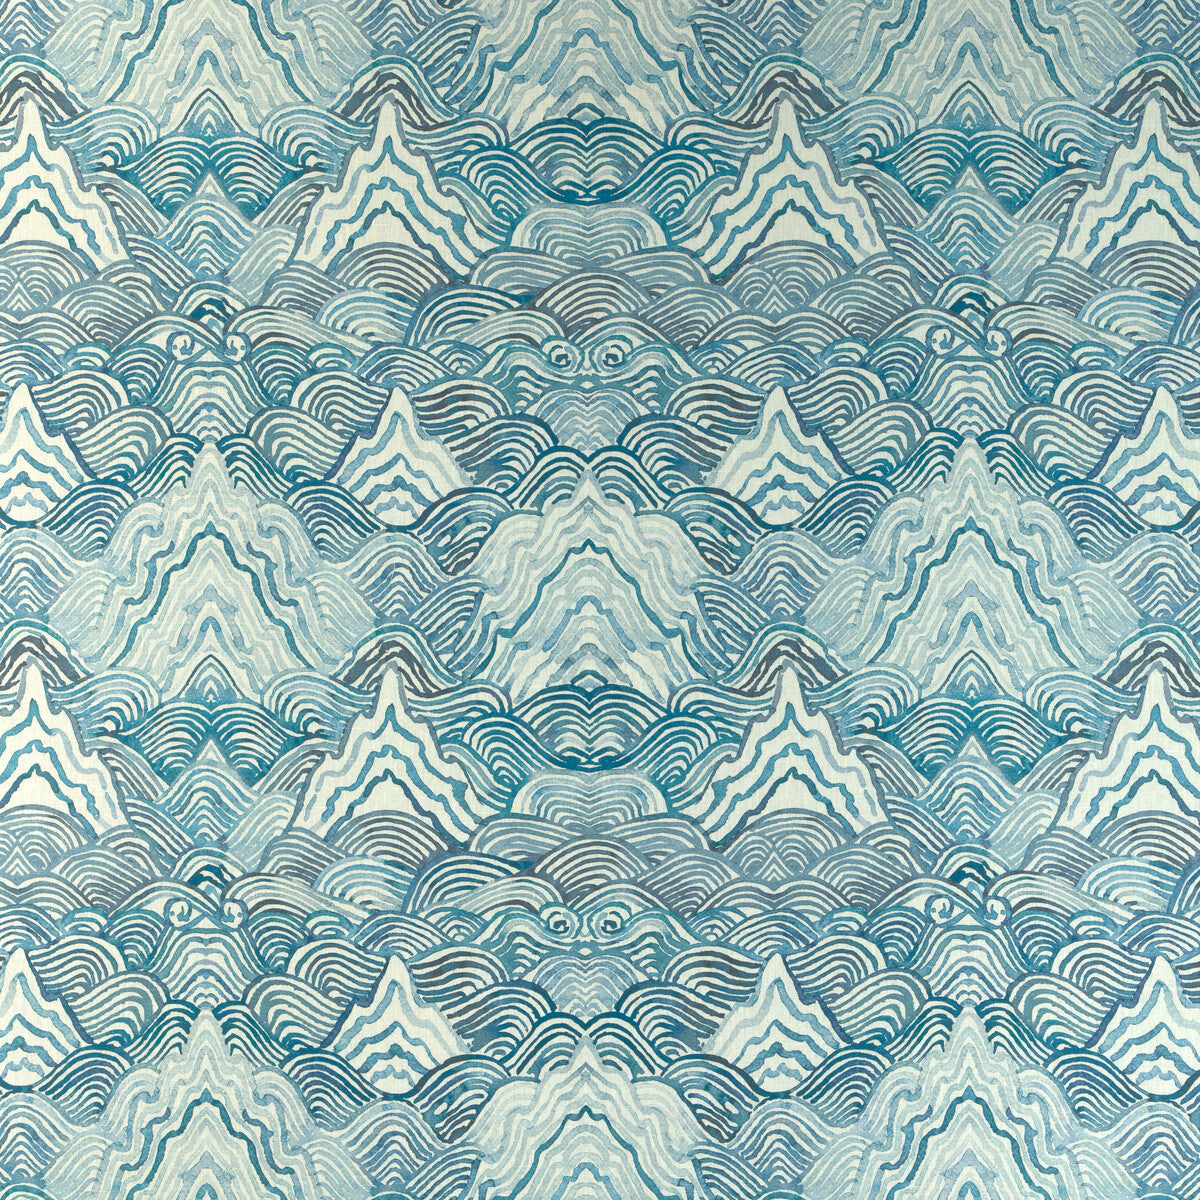 Shangri La fabric in indigo color - pattern SHANGRI LA.5.0 - by Kravet Couture in the Casa Botanica collection